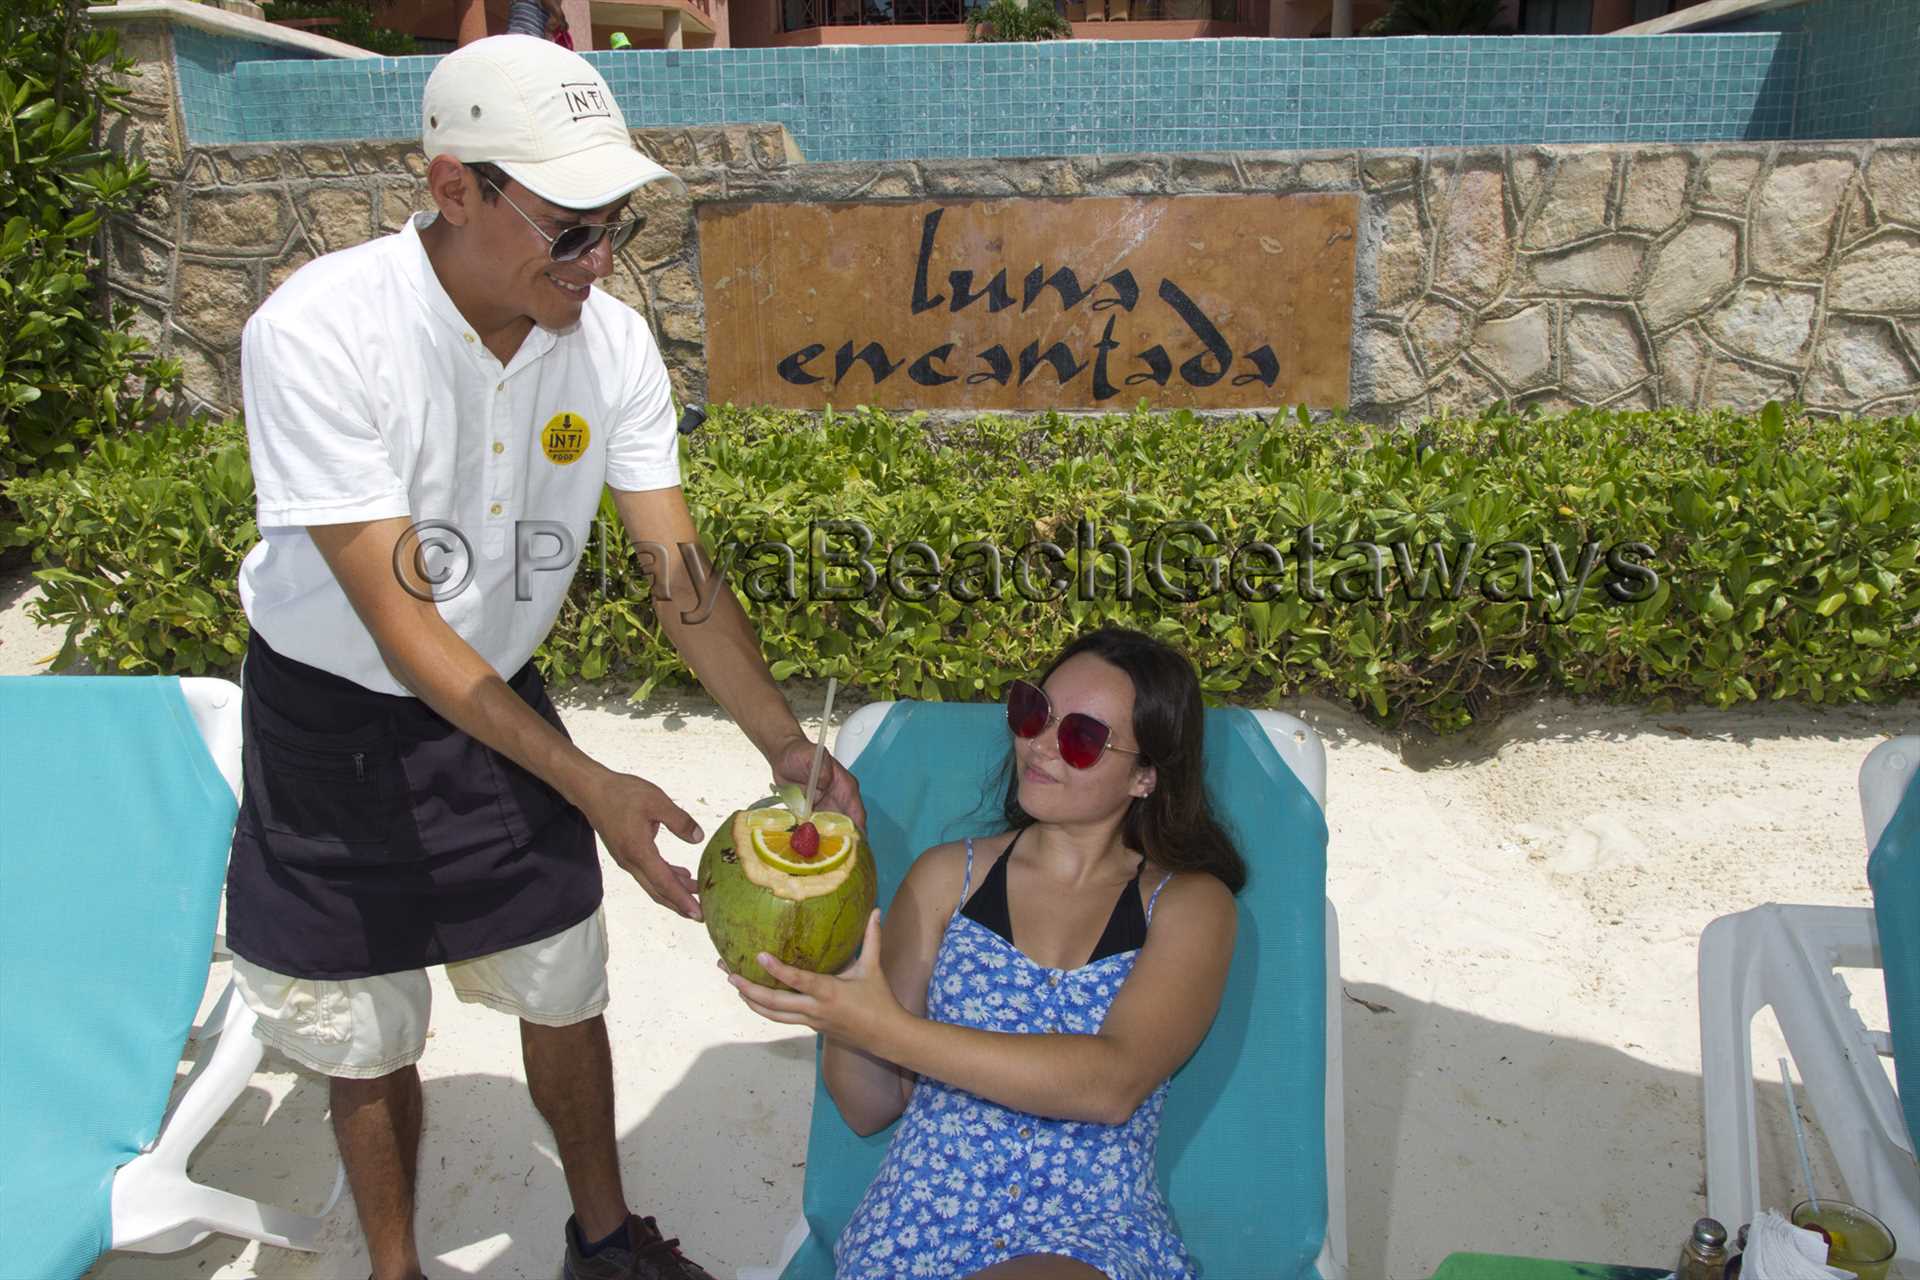 Enjoy purchased food/drink delivered to your lounger!